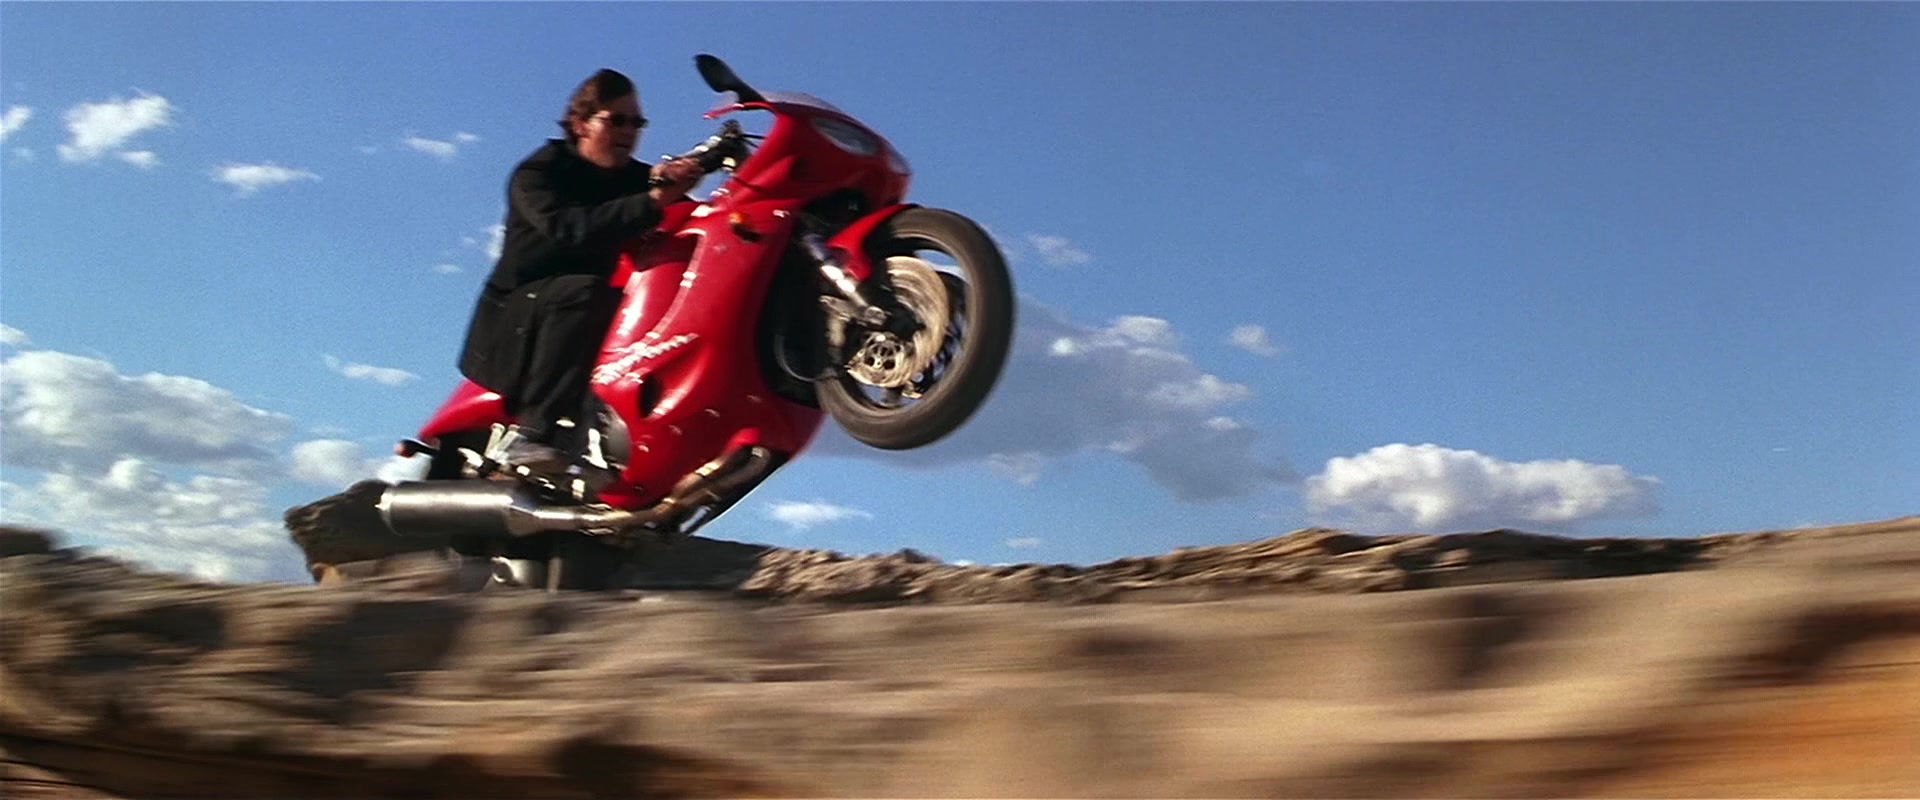 Triumph-Daytona-955i-Red-Motorcycle-Used-by-Dougray-Scott-in-Mission-Impossible-II-6.jpg